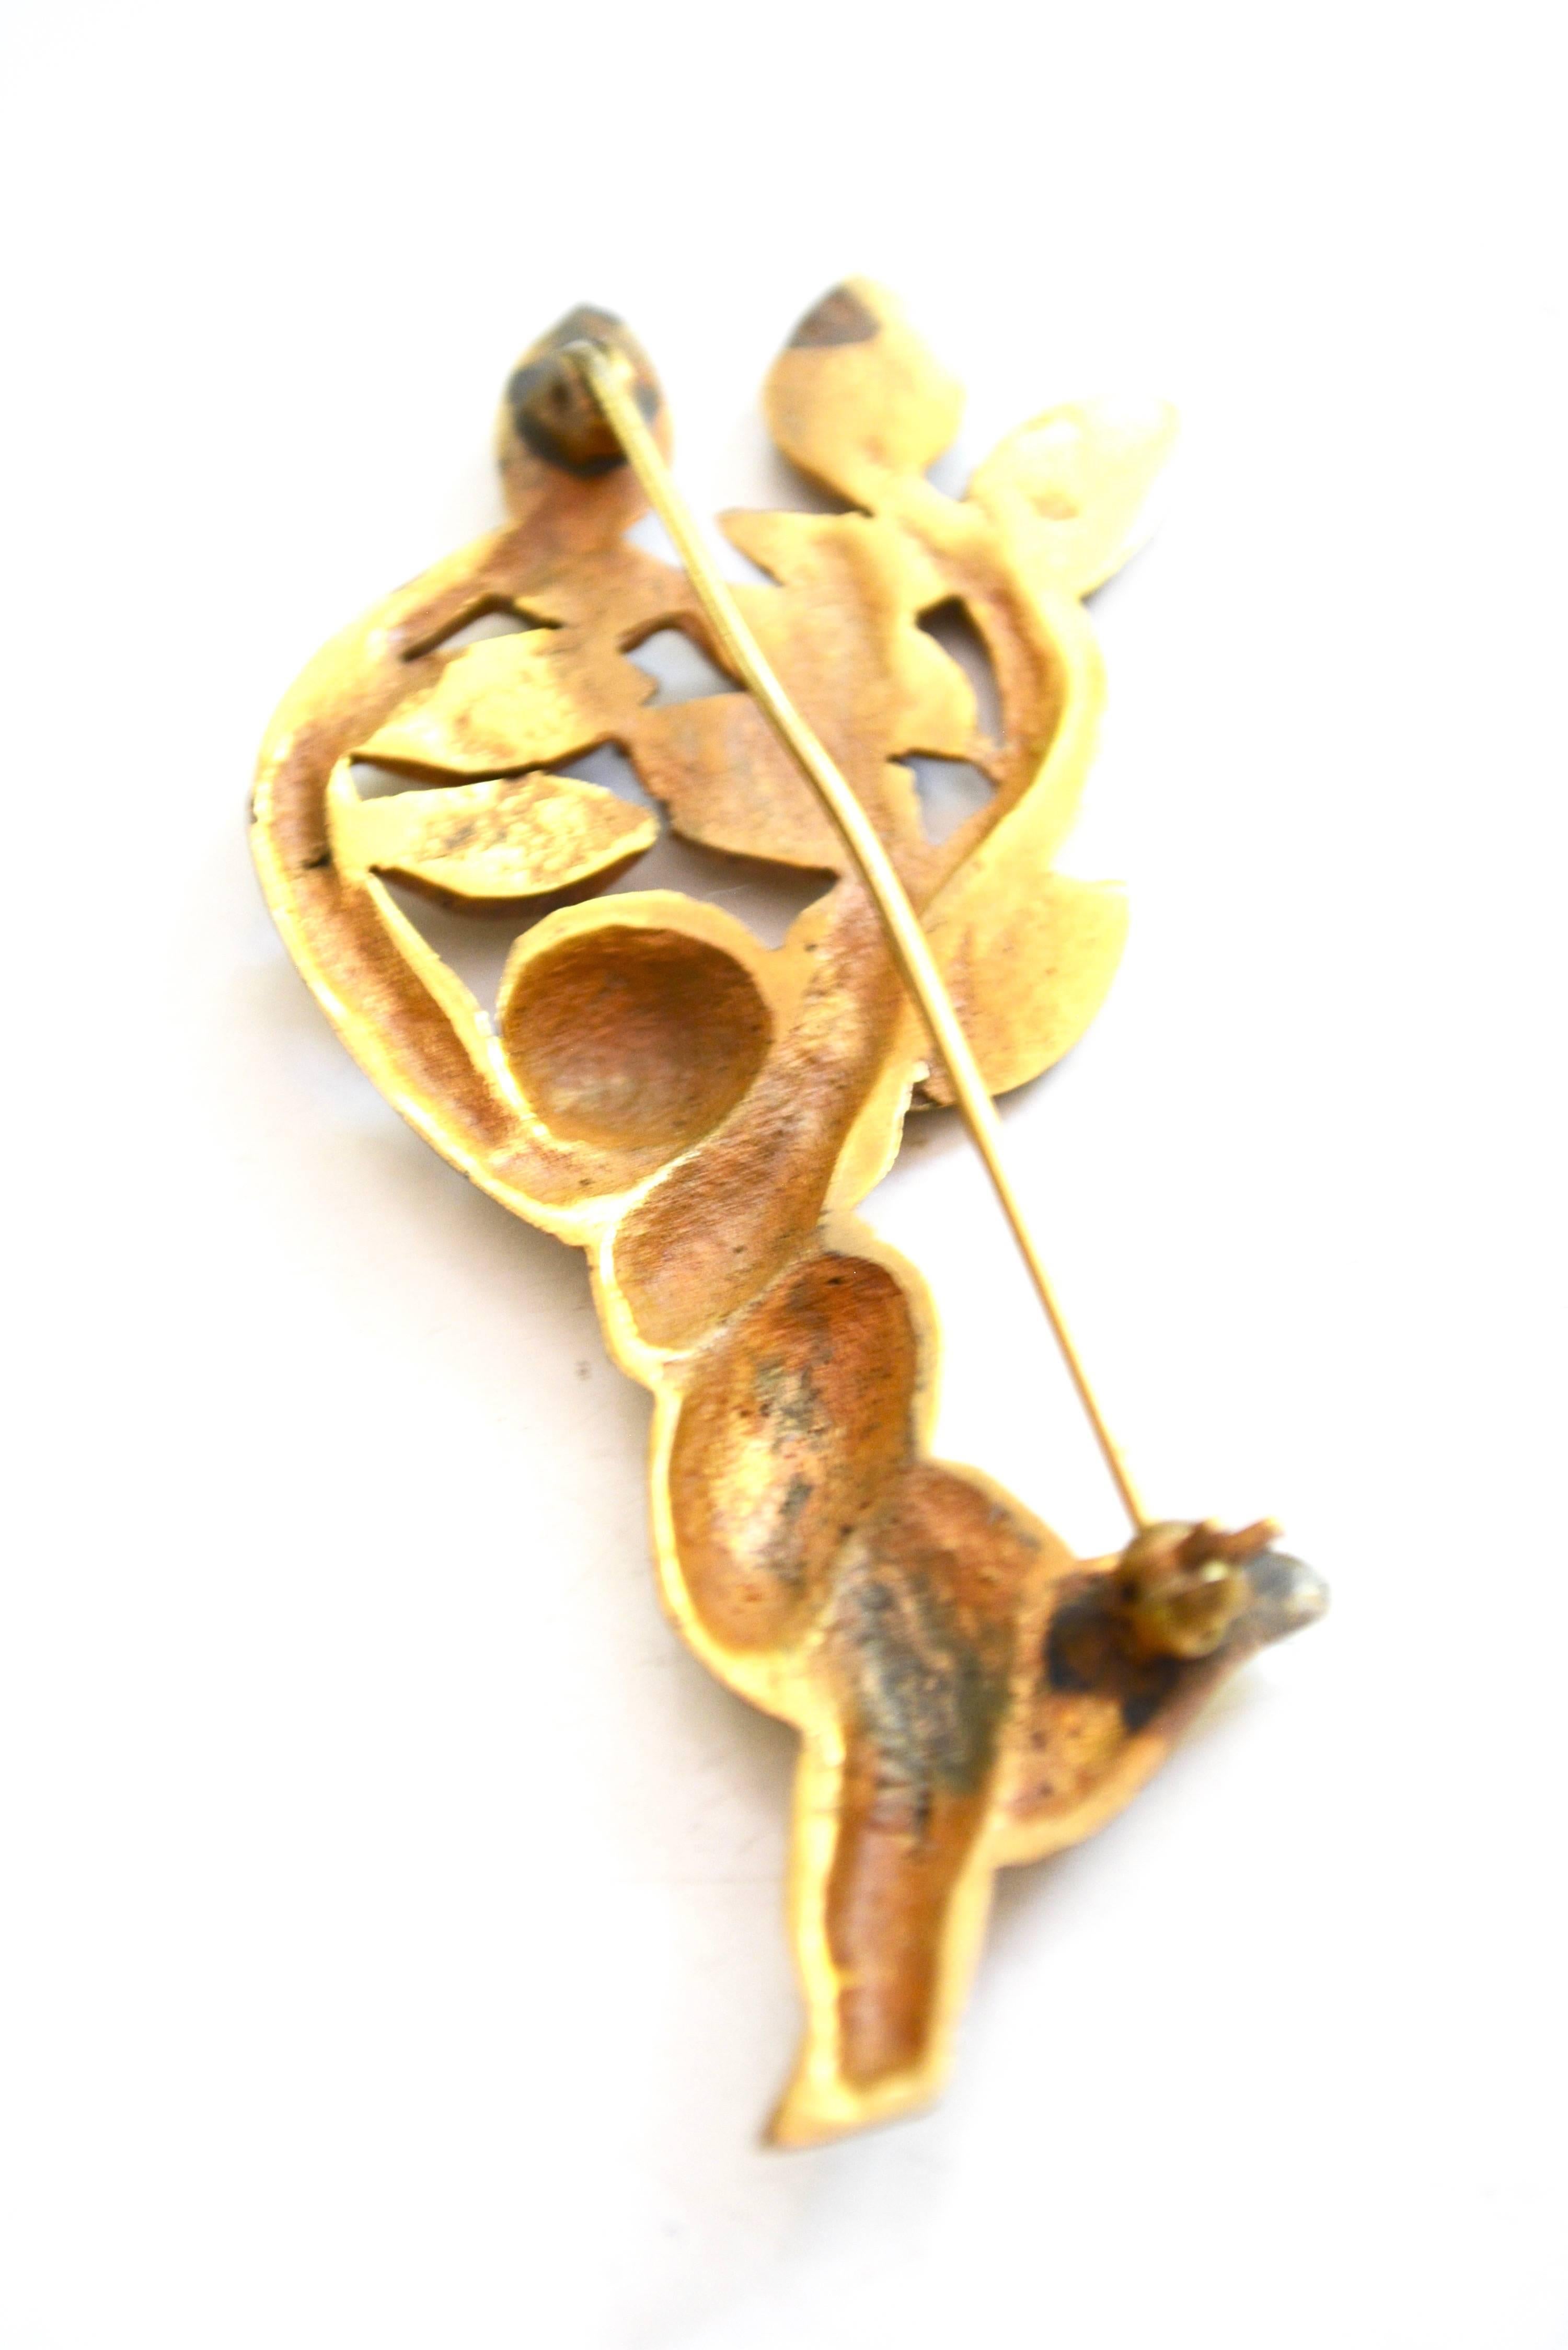 Signed LV gilt whimsical dancing figure becoming a tree. The arms are branching out with leaves.  A bit over 3" long. Width varies from 1.25". Rare and demonstrative of her gilding. Circa 1940s-50s.